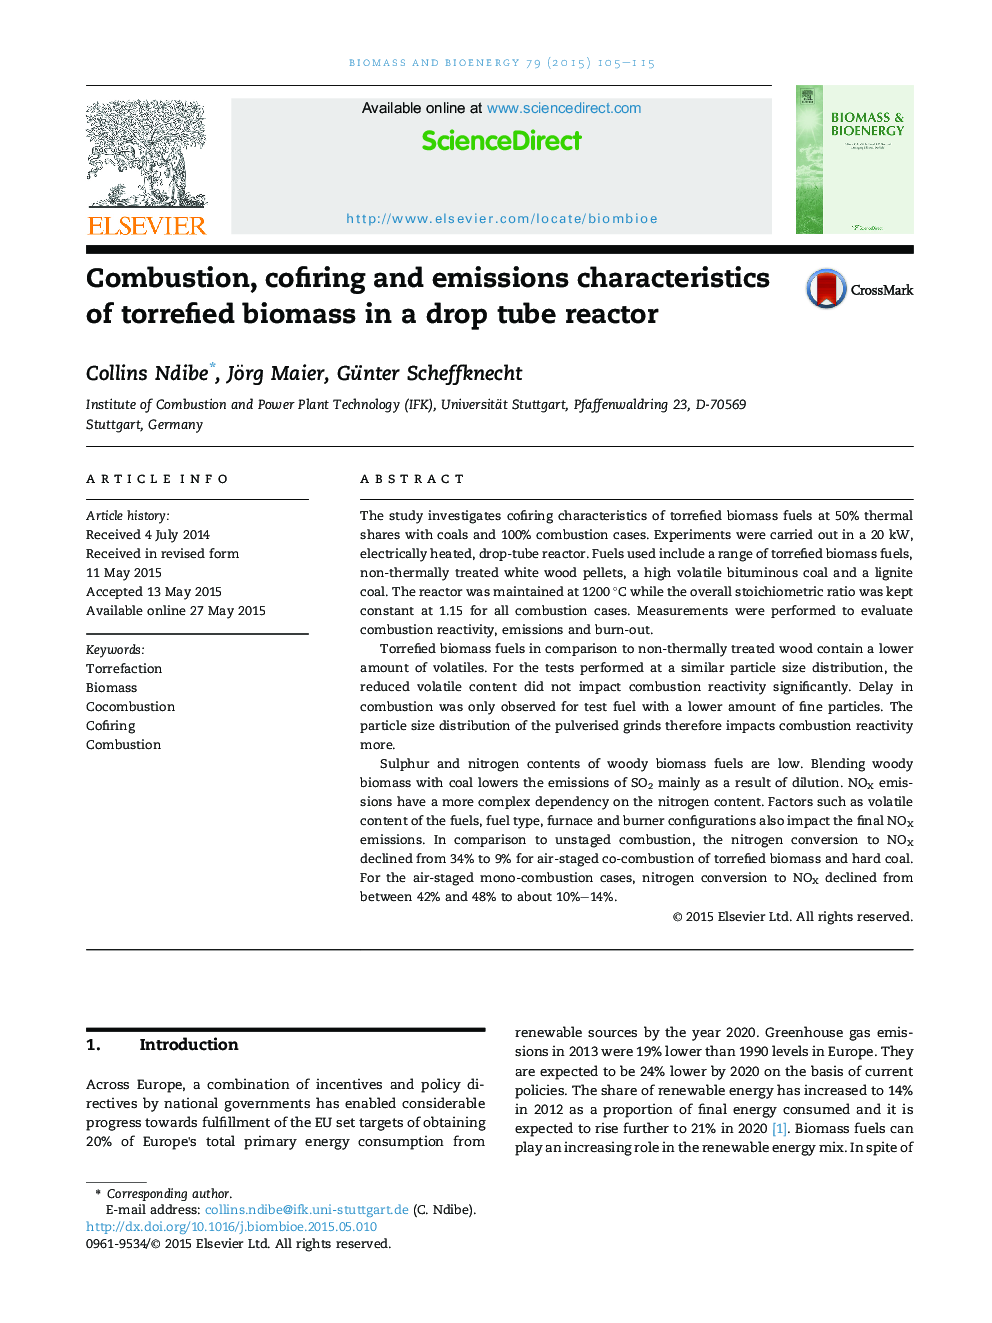 Combustion, cofiring and emissions characteristics of torrefied biomass in a drop tube reactor